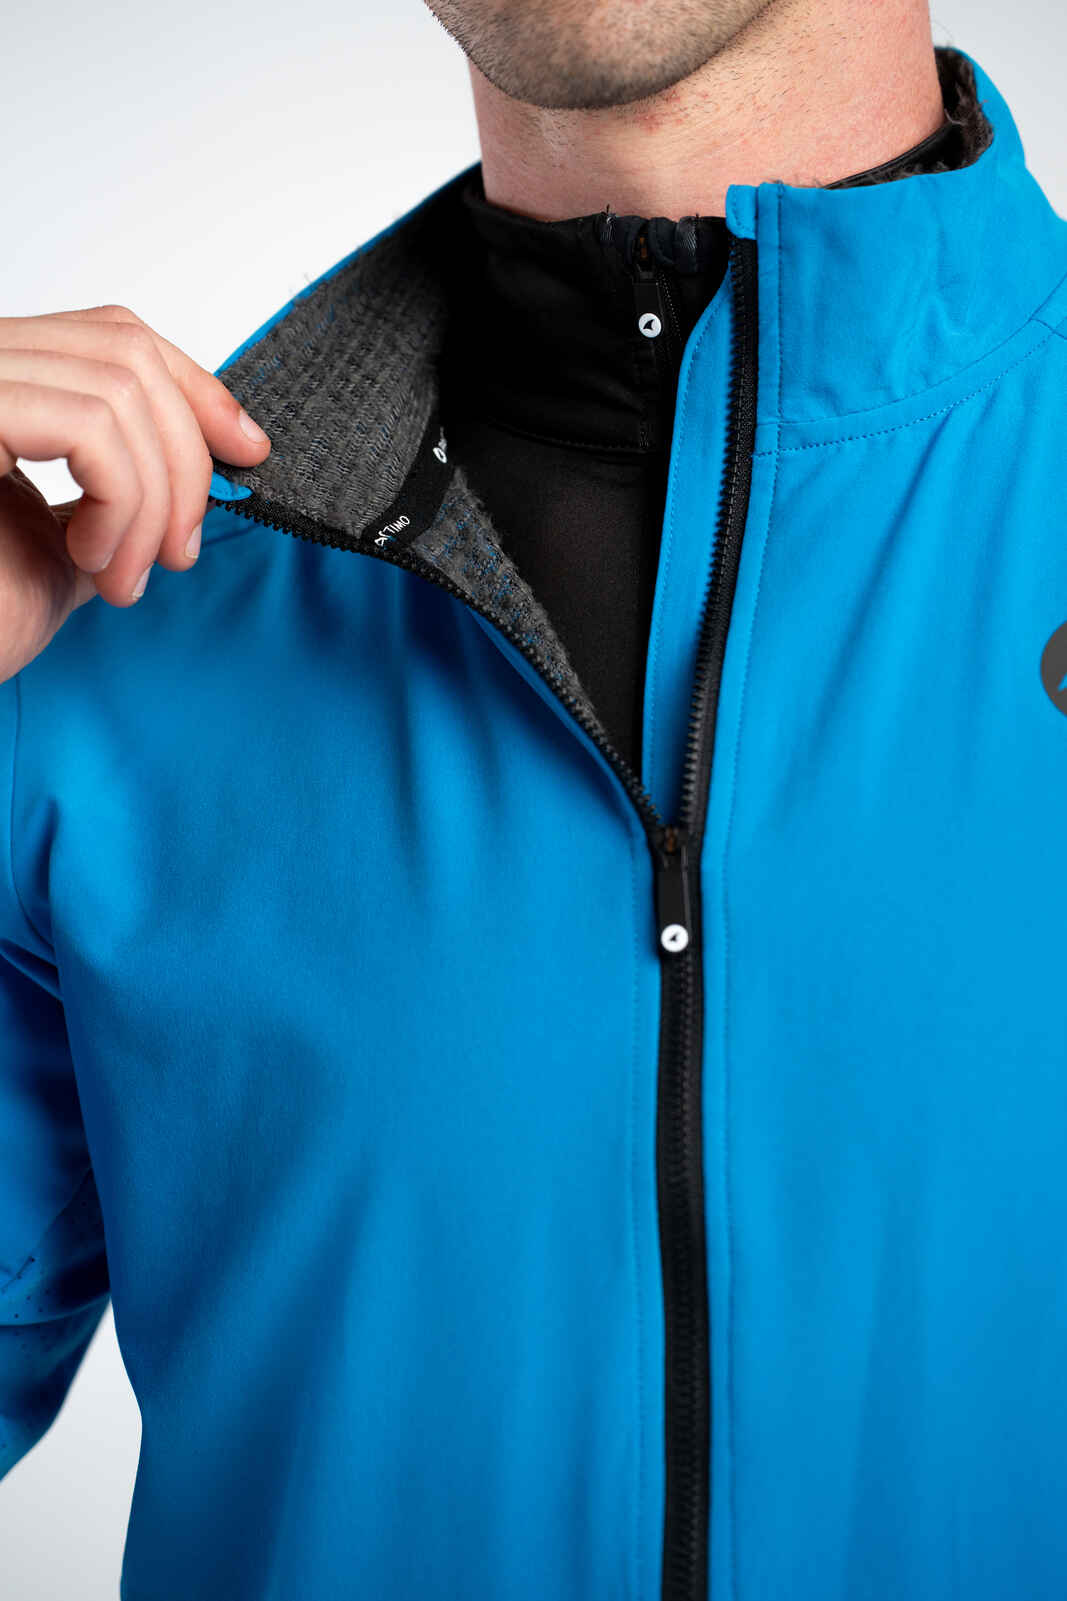 Men's Bright Blue Thermal Cycling Jacket - Fill and Zipper Detail